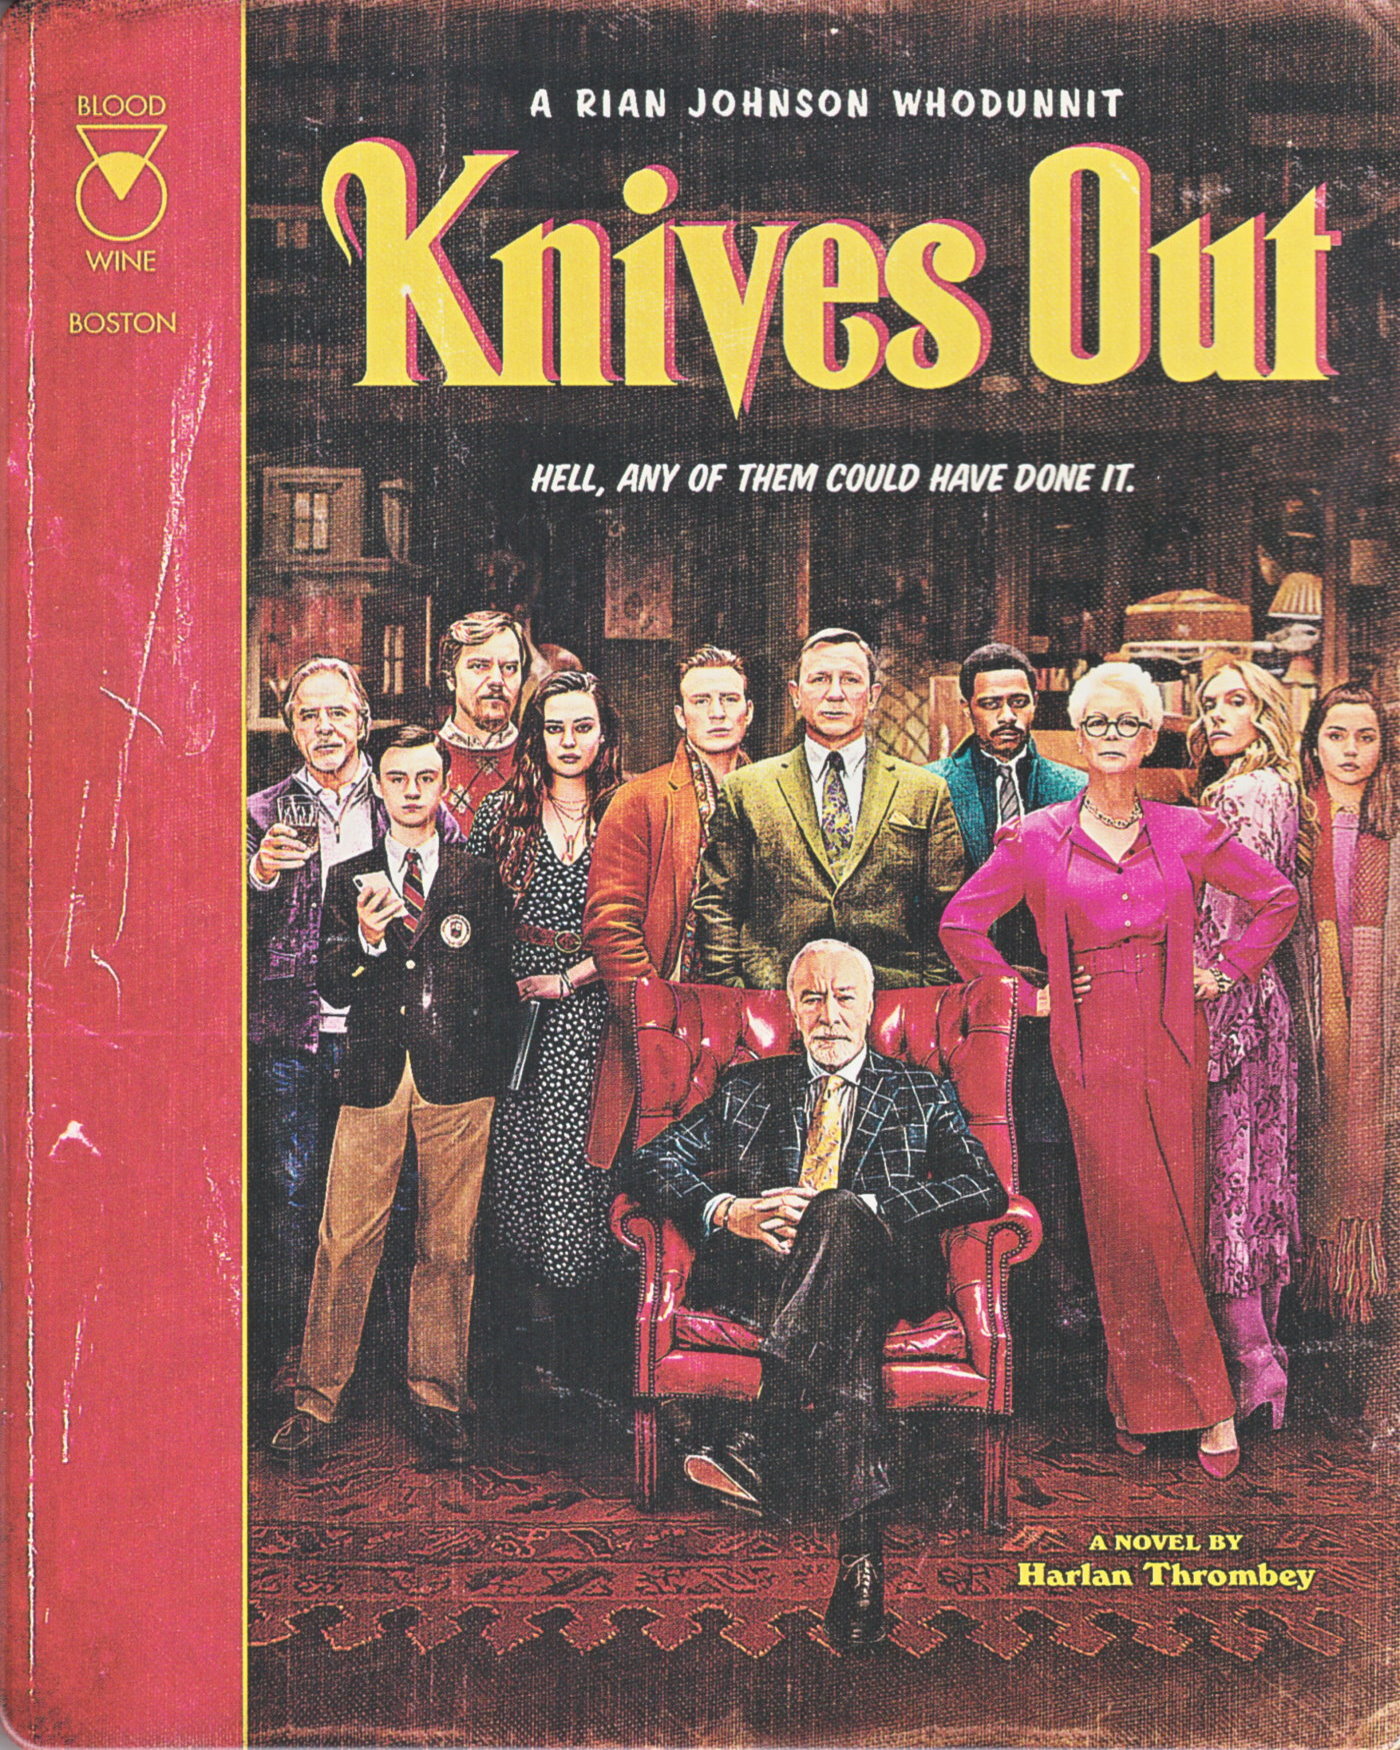 Cover - Knives Out - Mord ist Familiensache.jpg